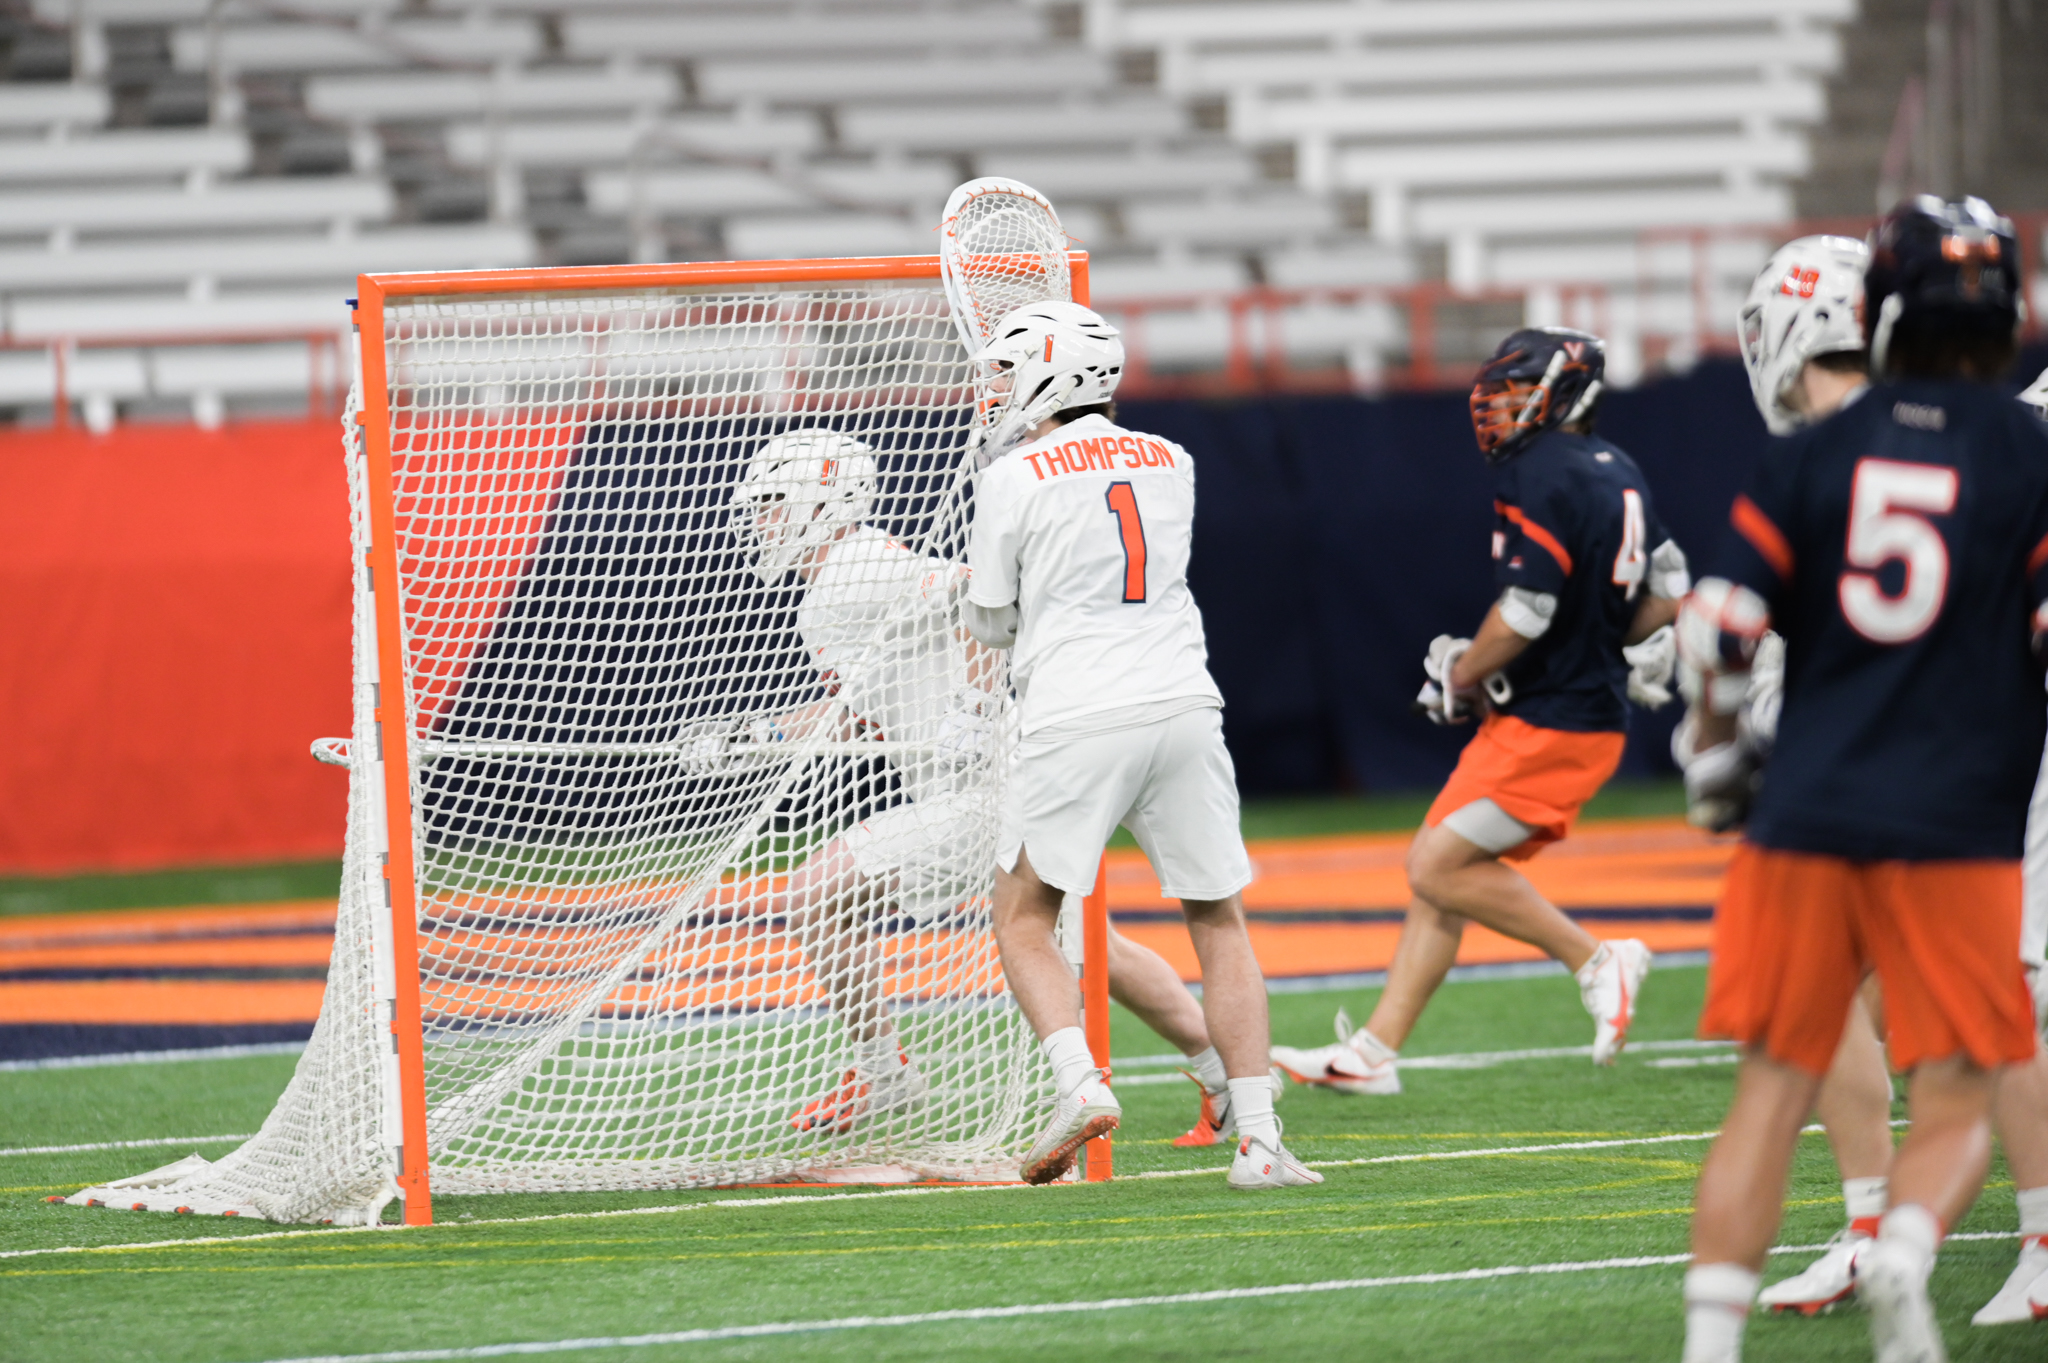 Syracuse goalie Harrison Thompson defends the cage during the Orange's match vs. Virginia in the Carrier Dome on April 23, 2022.